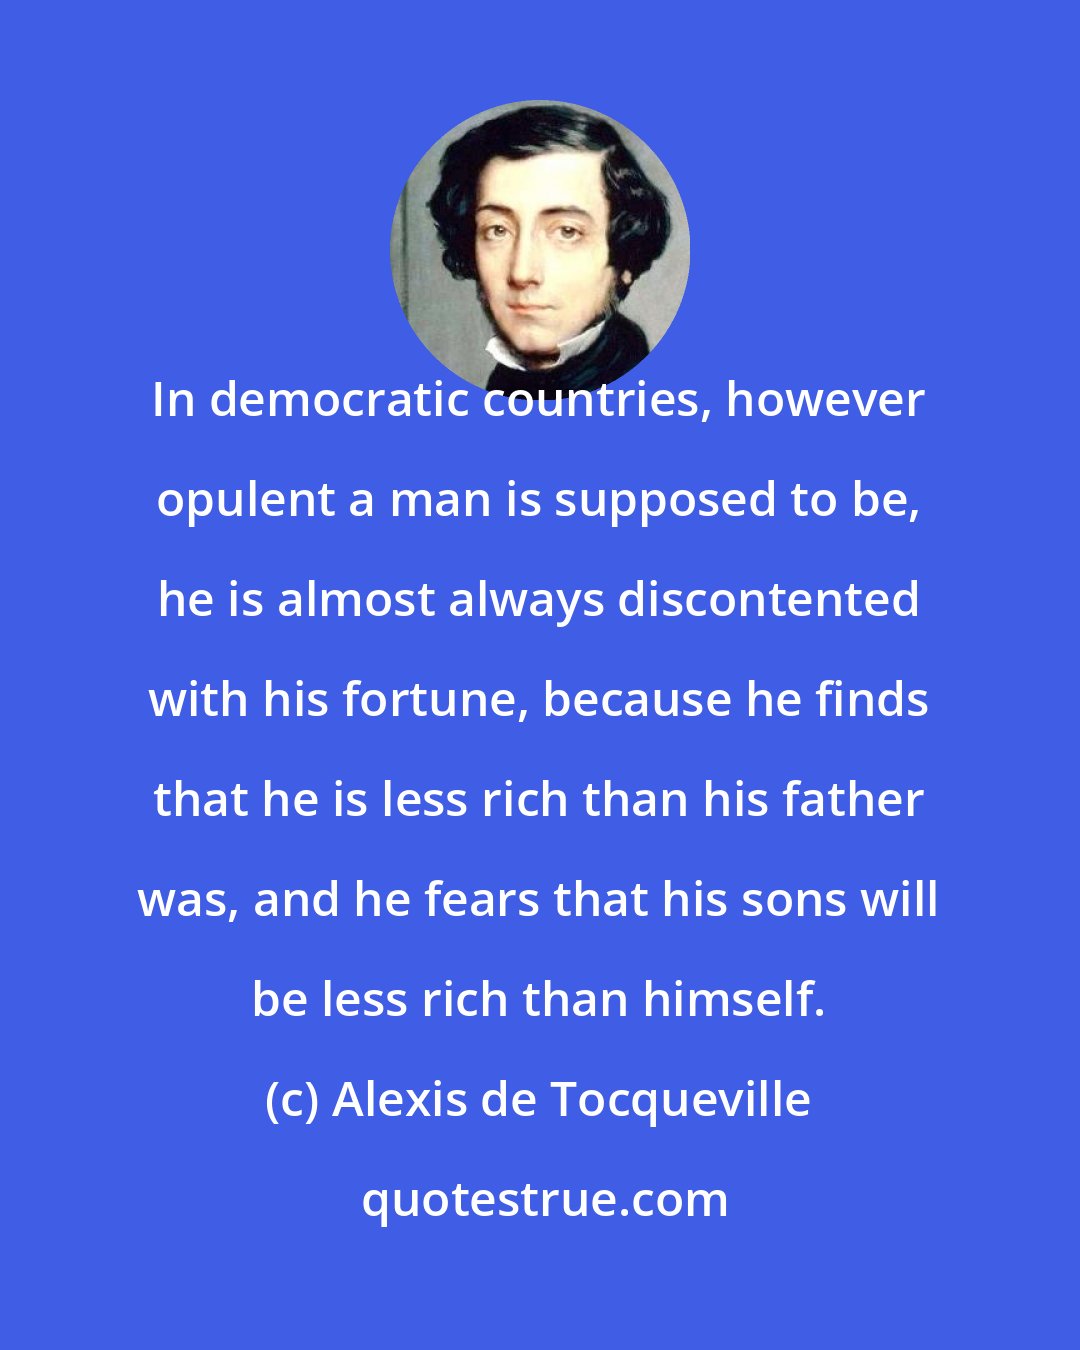 Alexis de Tocqueville: In democratic countries, however opulent a man is supposed to be, he is almost always discontented with his fortune, because he finds that he is less rich than his father was, and he fears that his sons will be less rich than himself.